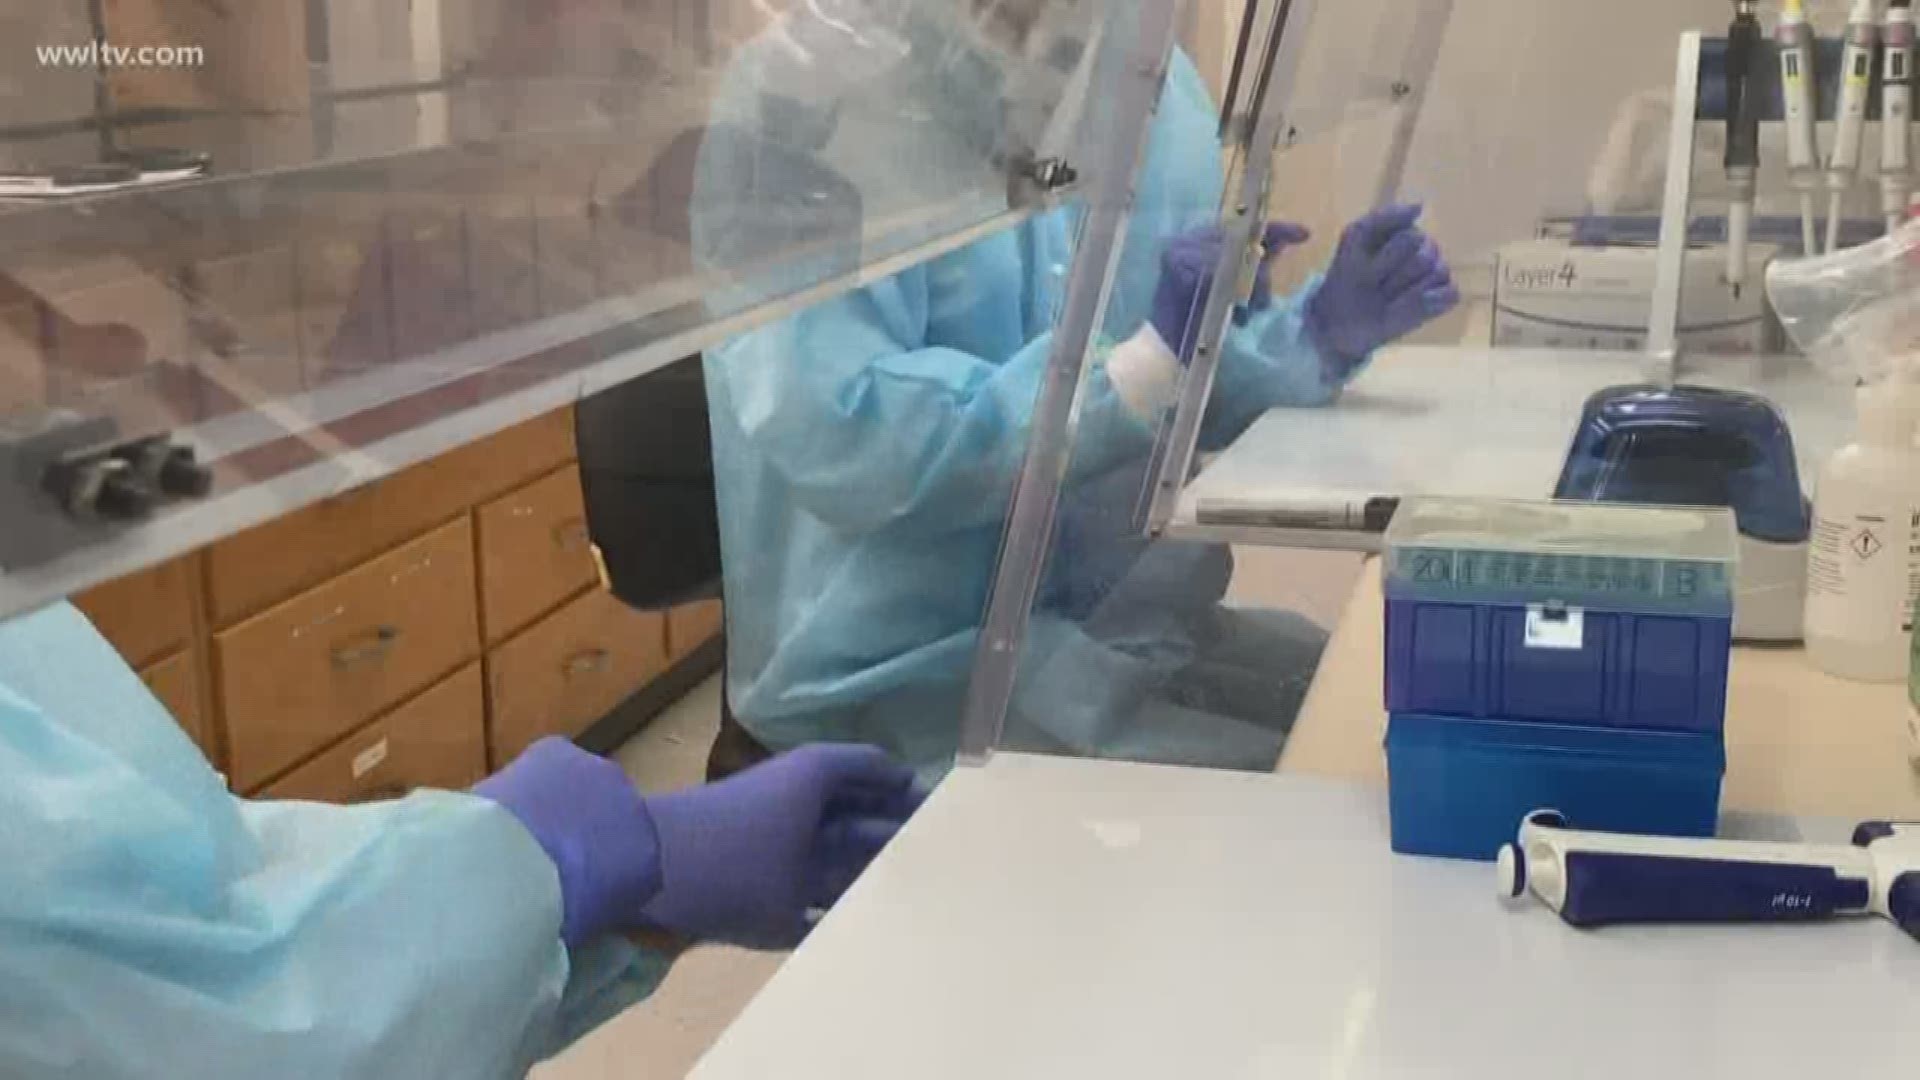 Tulane Medical School on Wednesday rolled out a new test designed by one of its doctors. The results come back in a day.